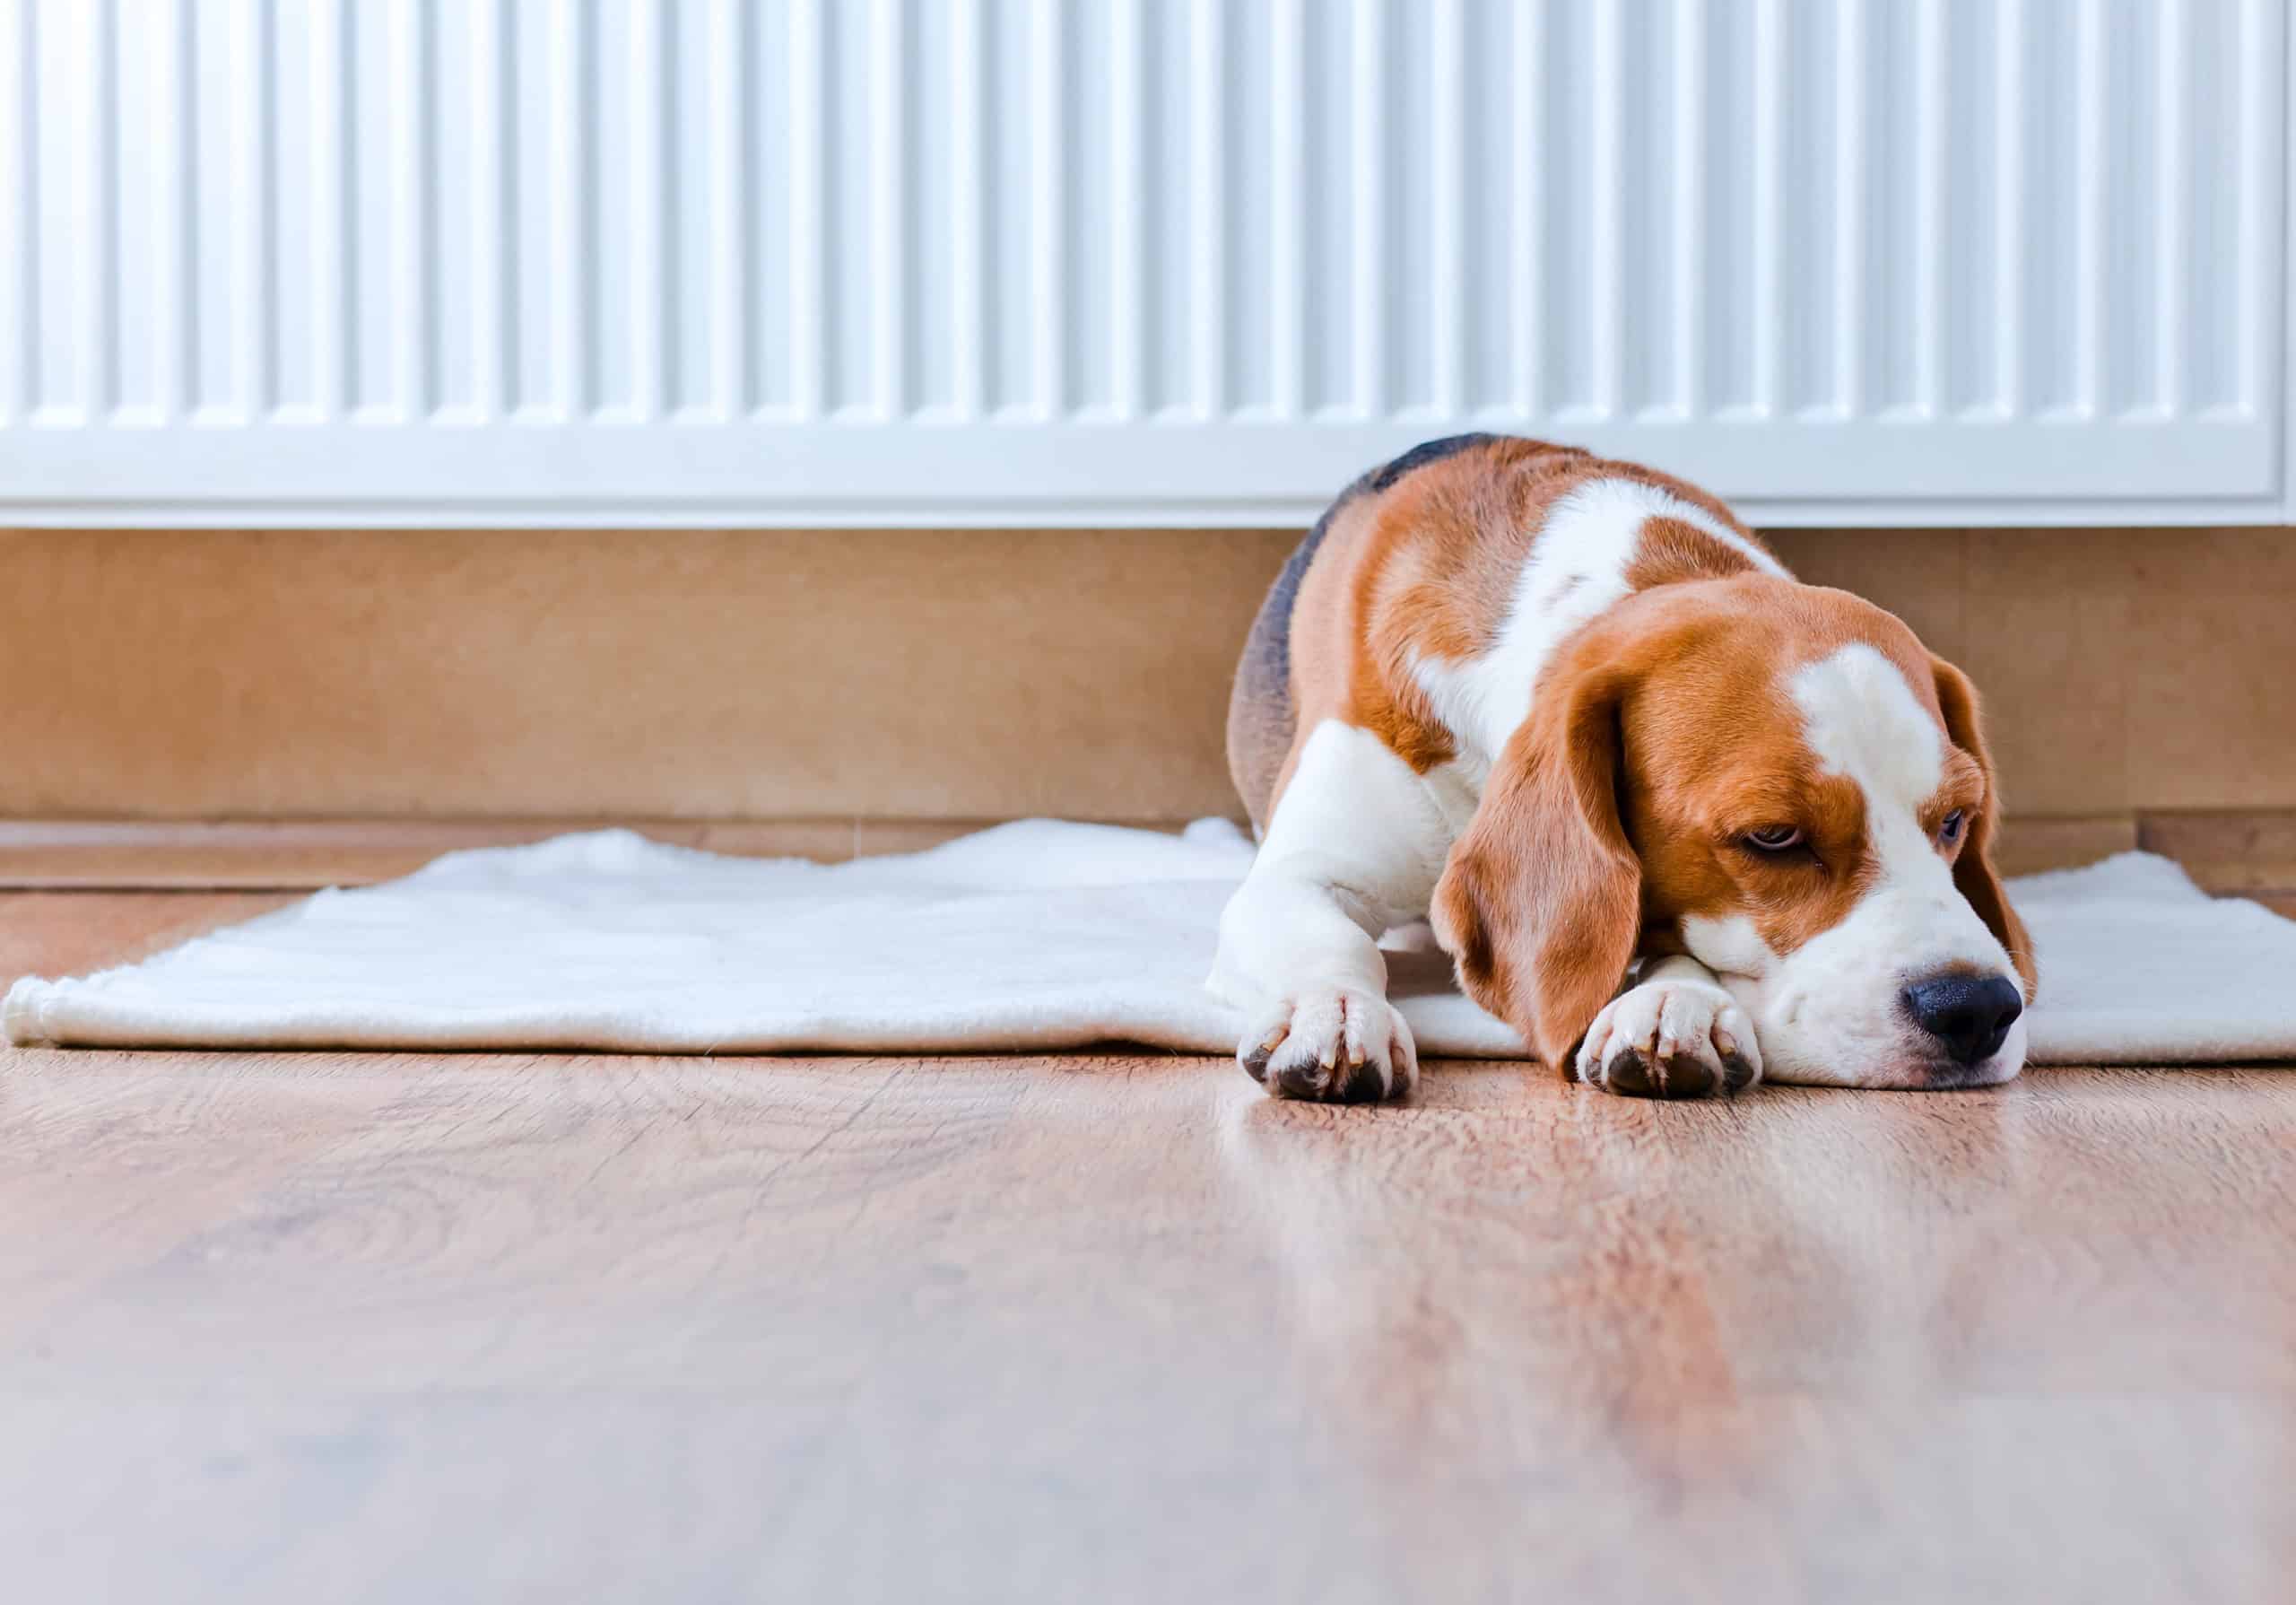 Do dogs get depressed after moving to a new home?